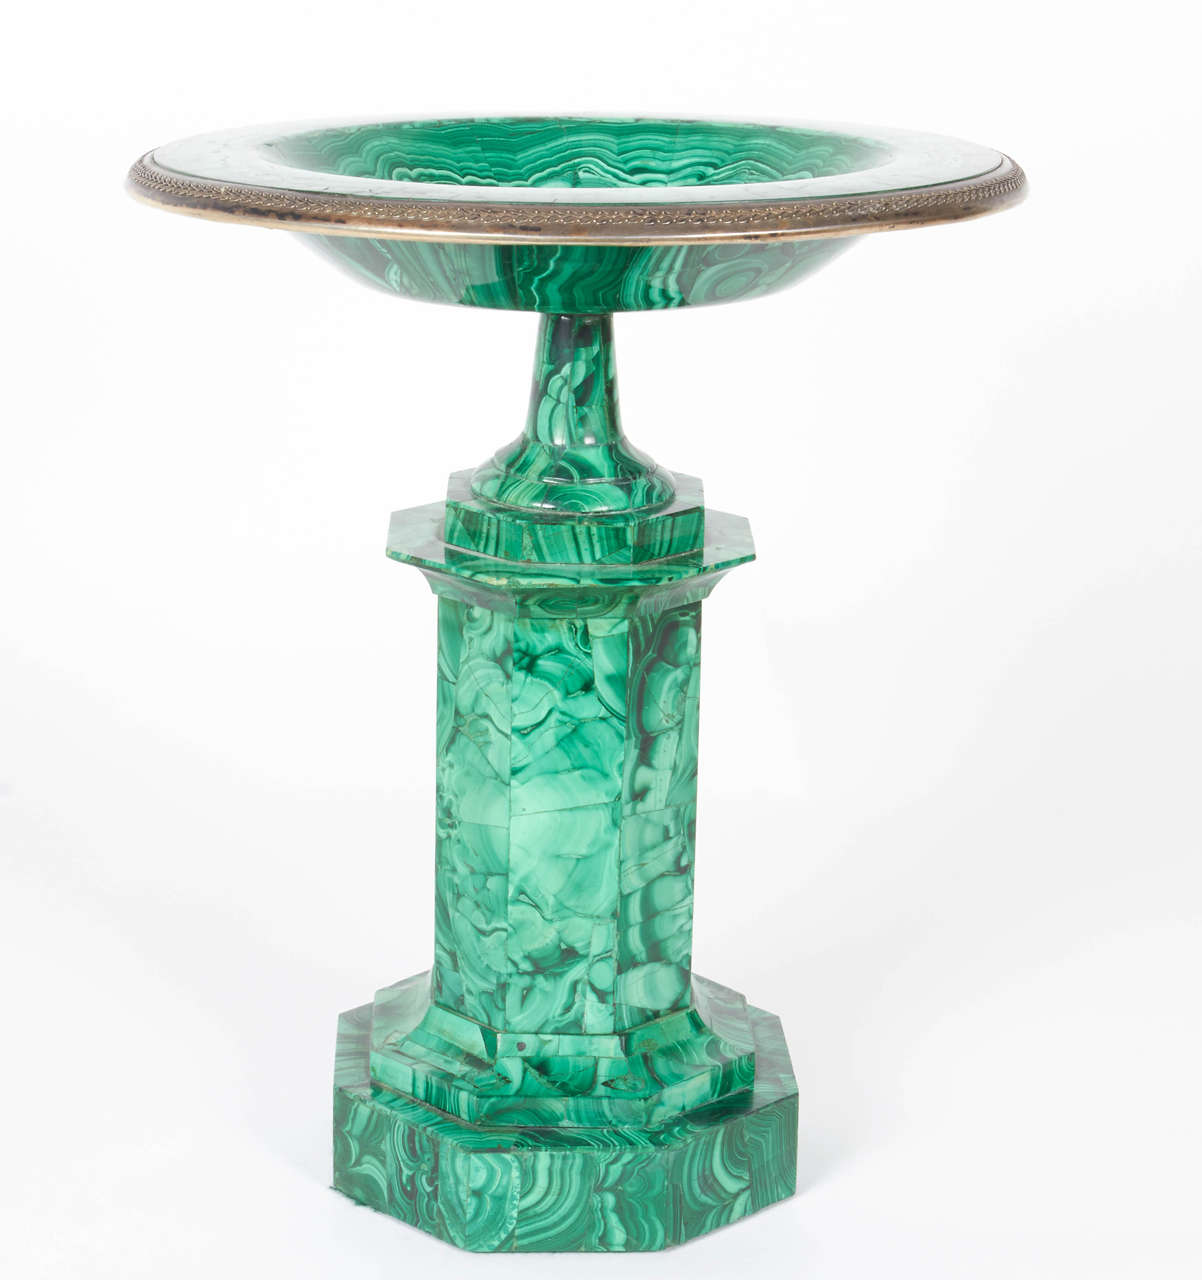 A very rare and important neoclassical Russian malachite centerpiece urn with a silver/silvered bronze rim from the Ekaterinburg Faceting Factory, Russia, circa 1830s. Similar pieces can be seen in the Hermitage Palace Museum.